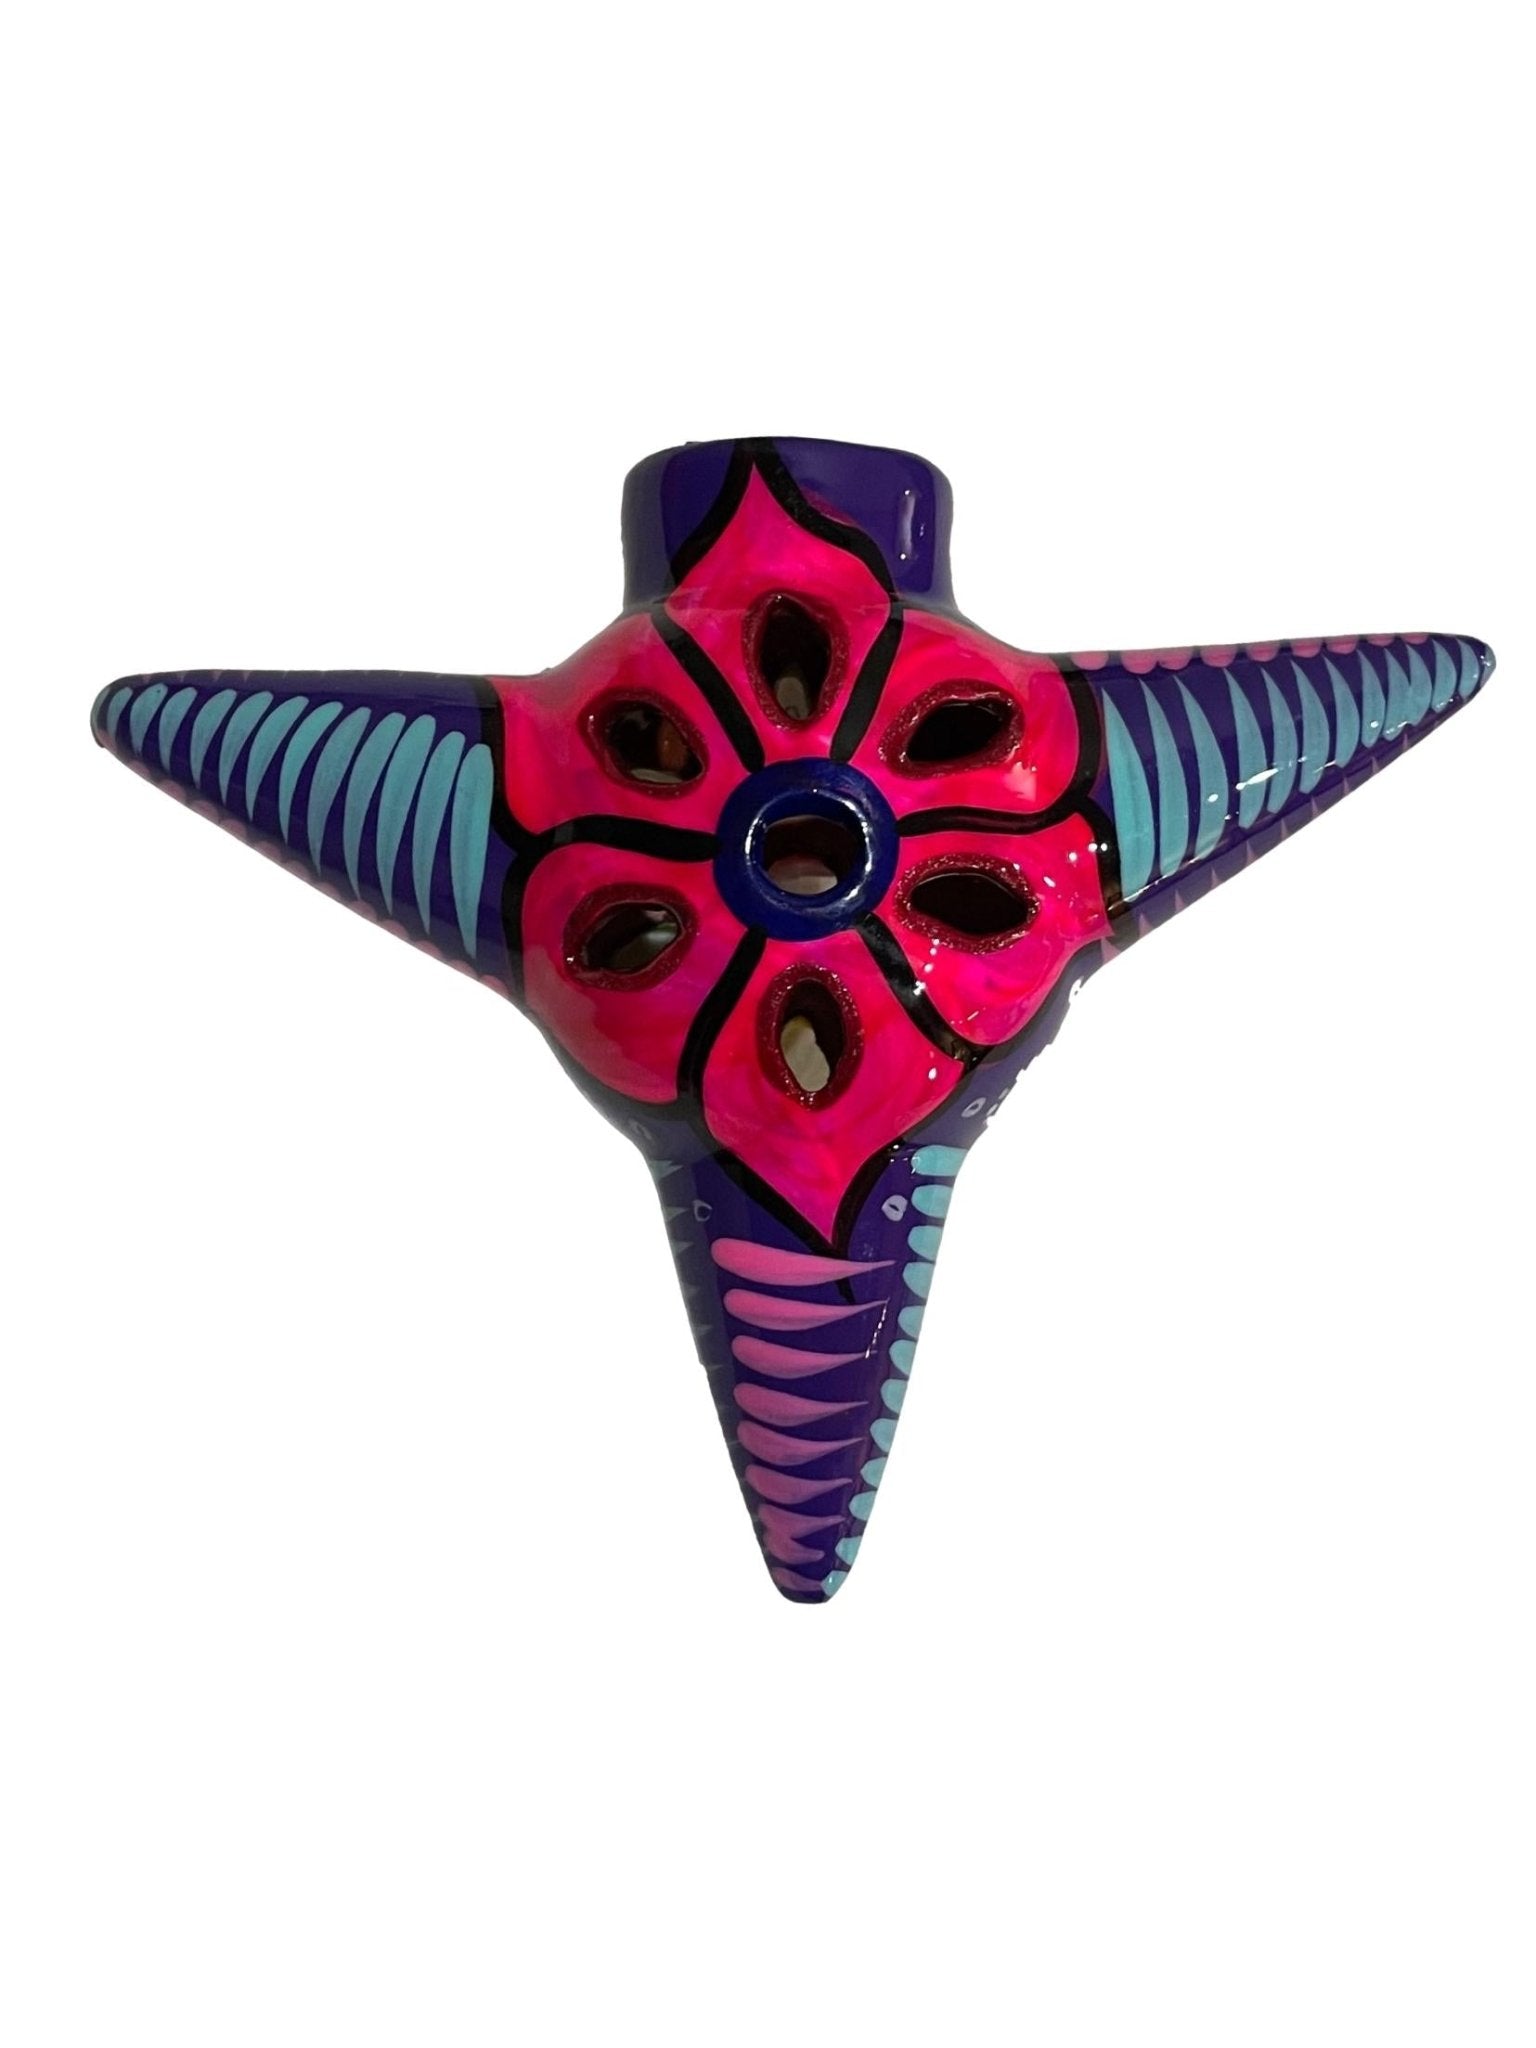 Ornament Ceramic Point Star Handcrafted